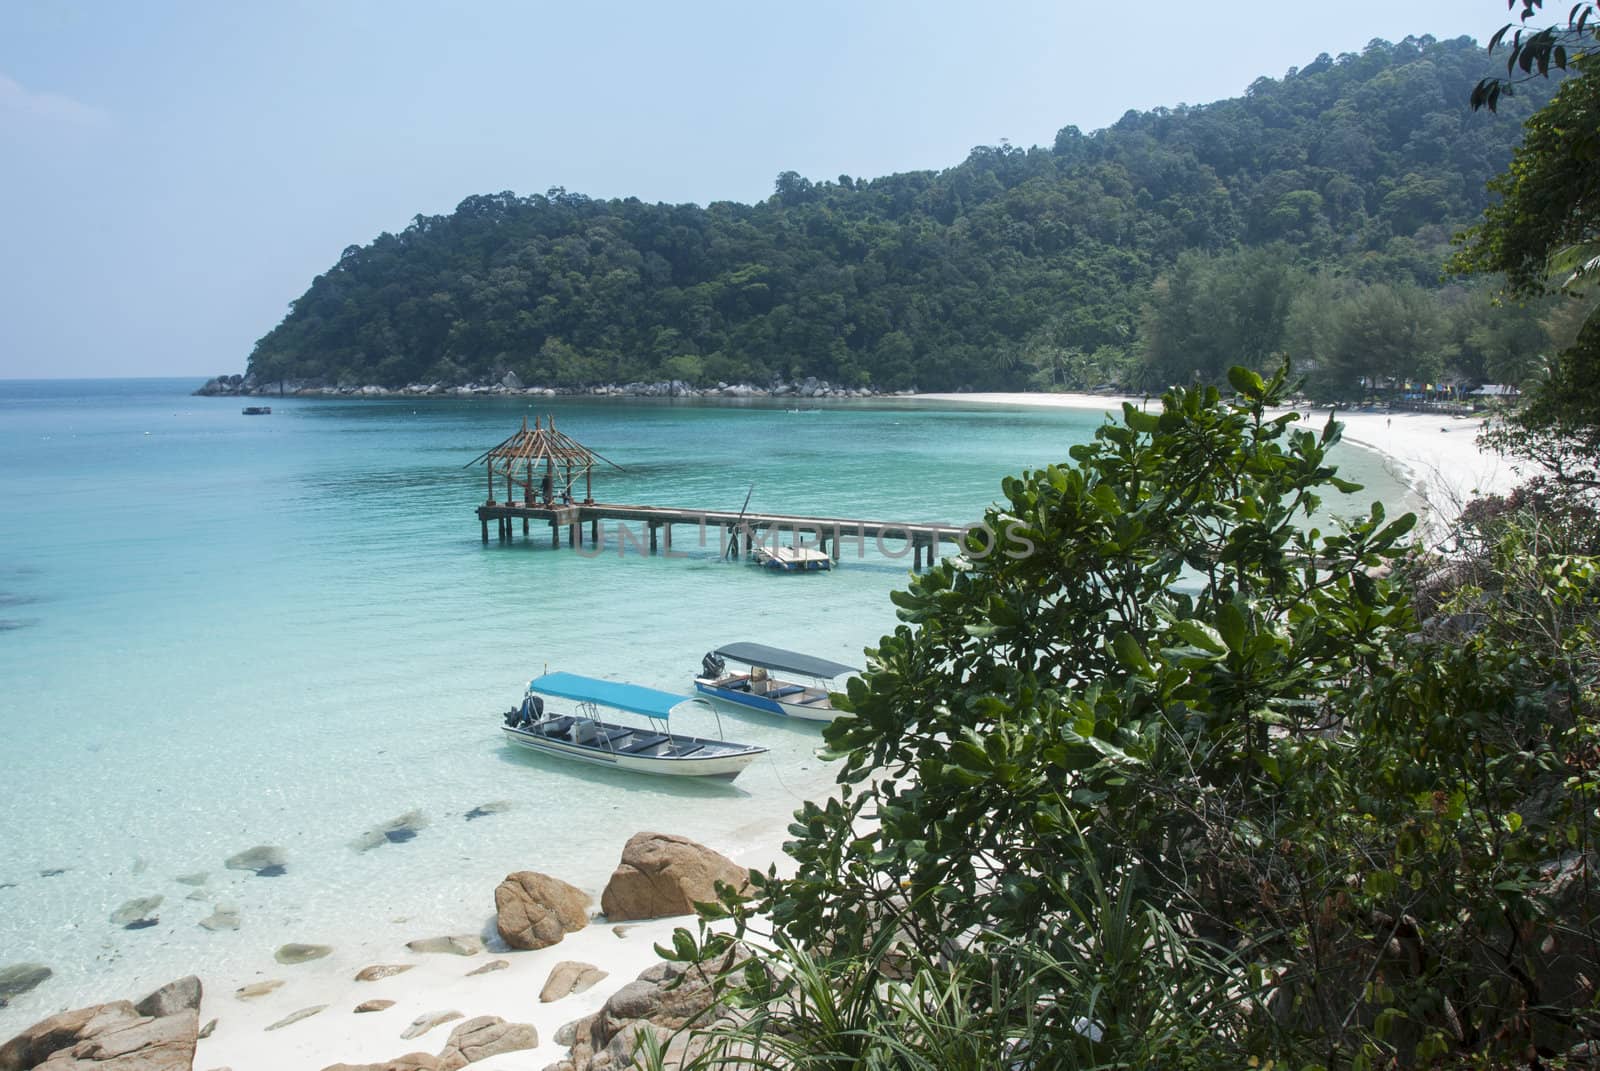 perhentian island beach with boats for transport